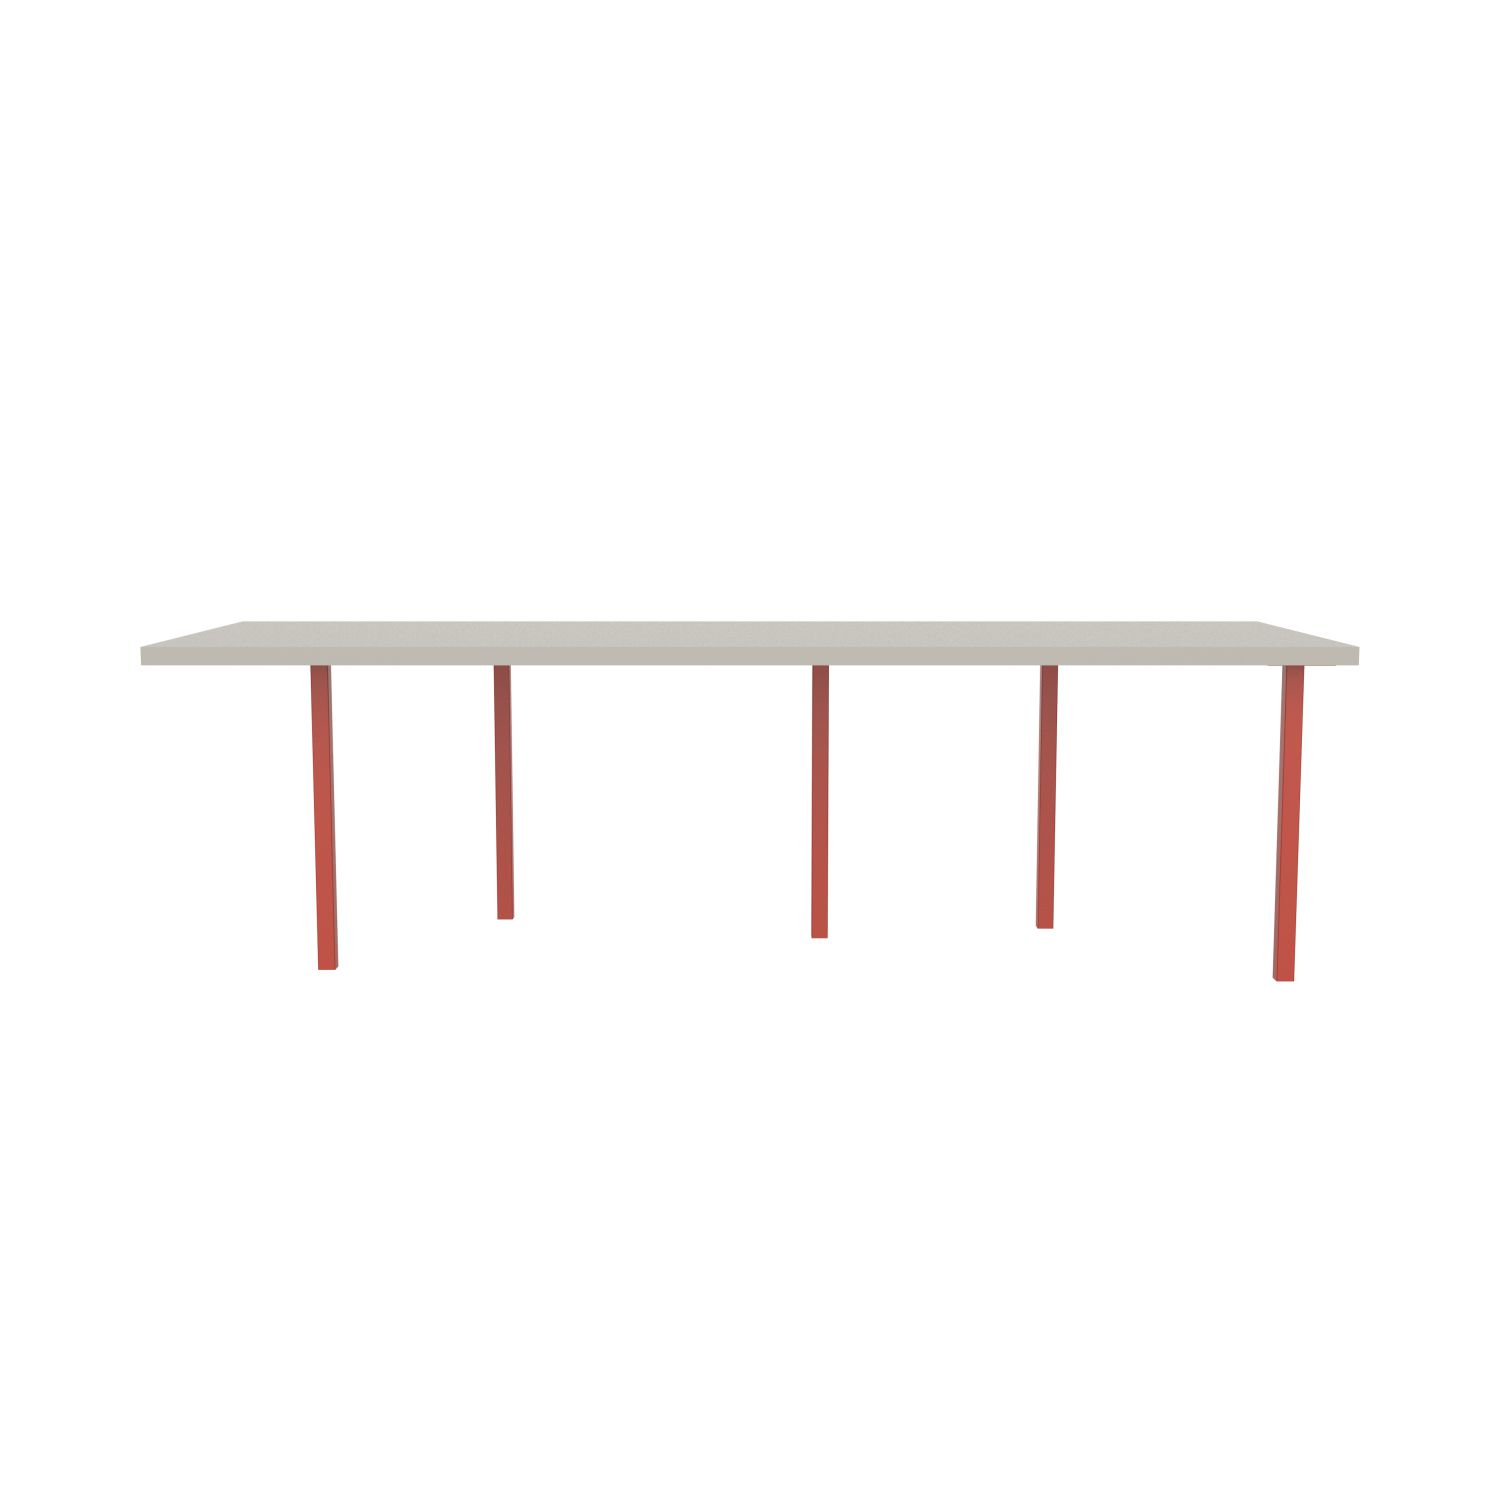 lensvelt bbrand table five fixed heigt 915x264 hpl white 50 mm price level 1 vermilion red ral2002